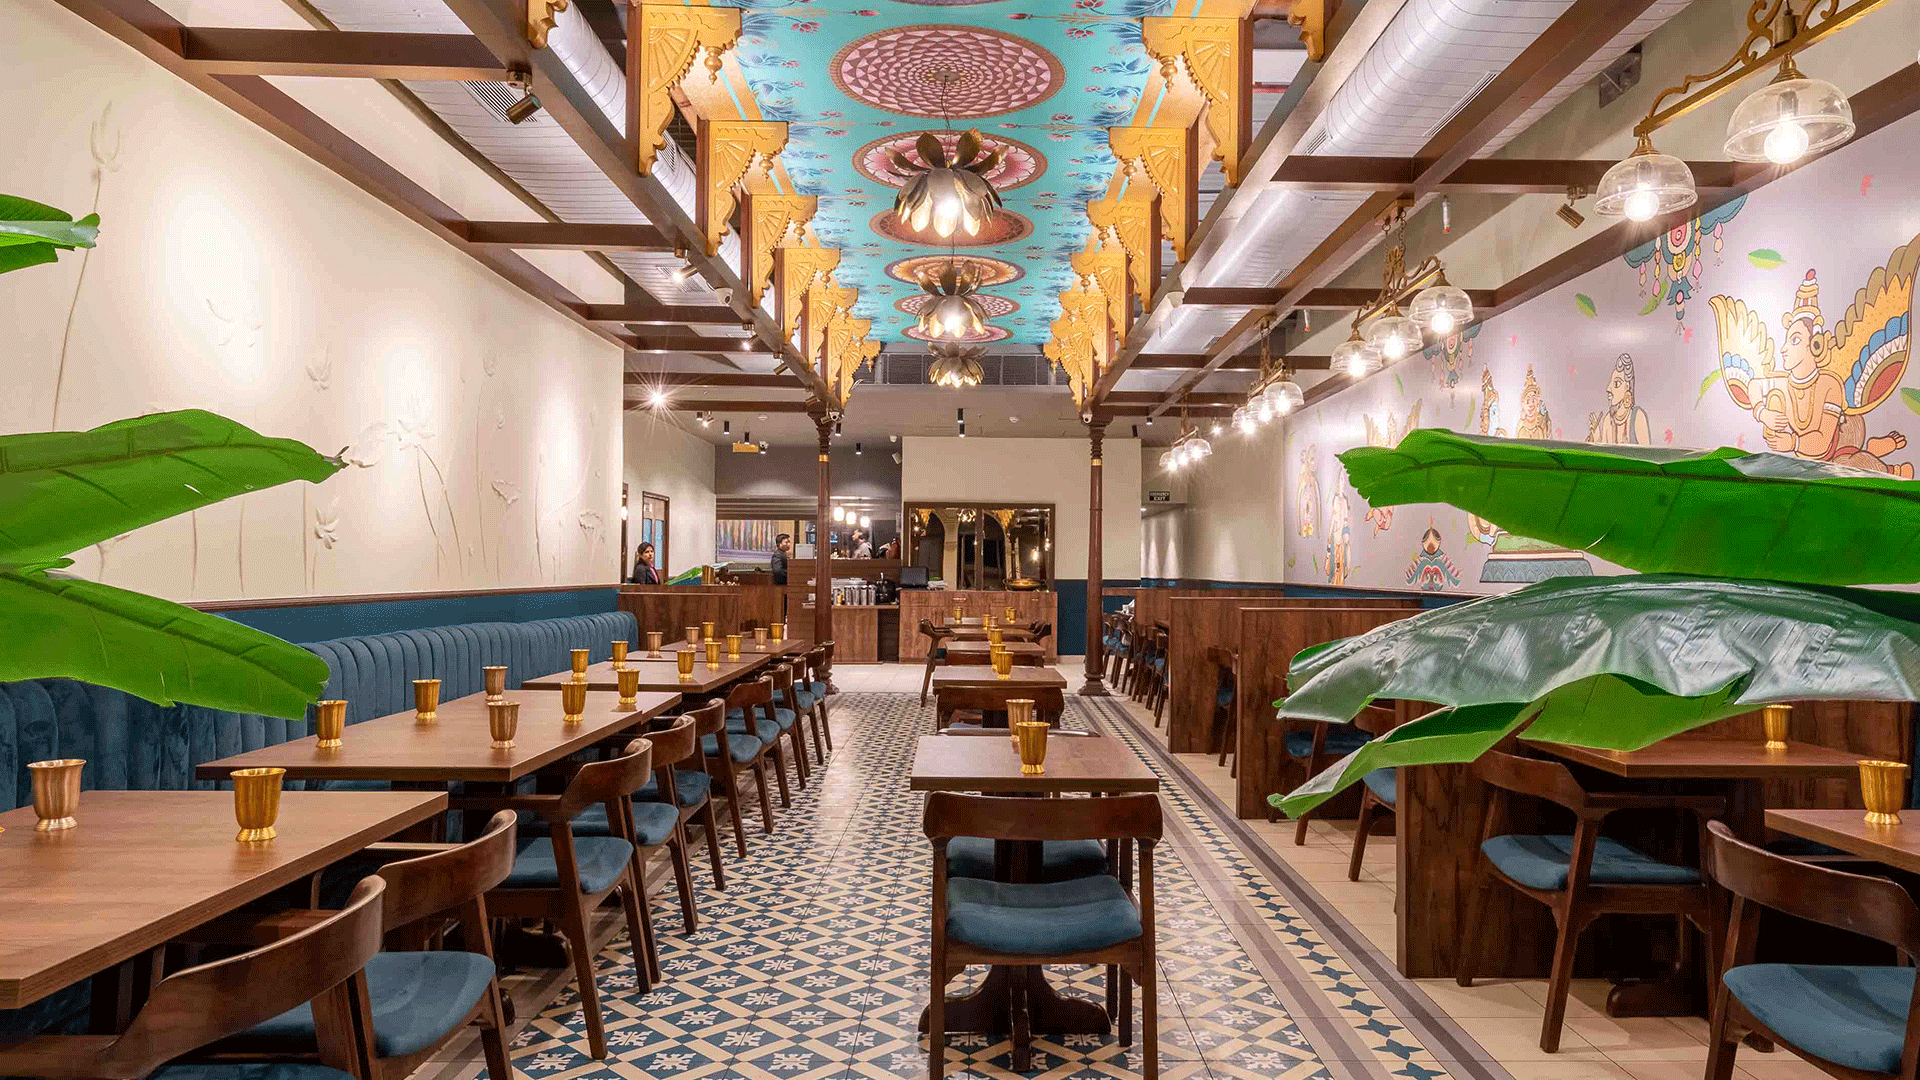 A traditional South Indian restaurant within a contemporary setting